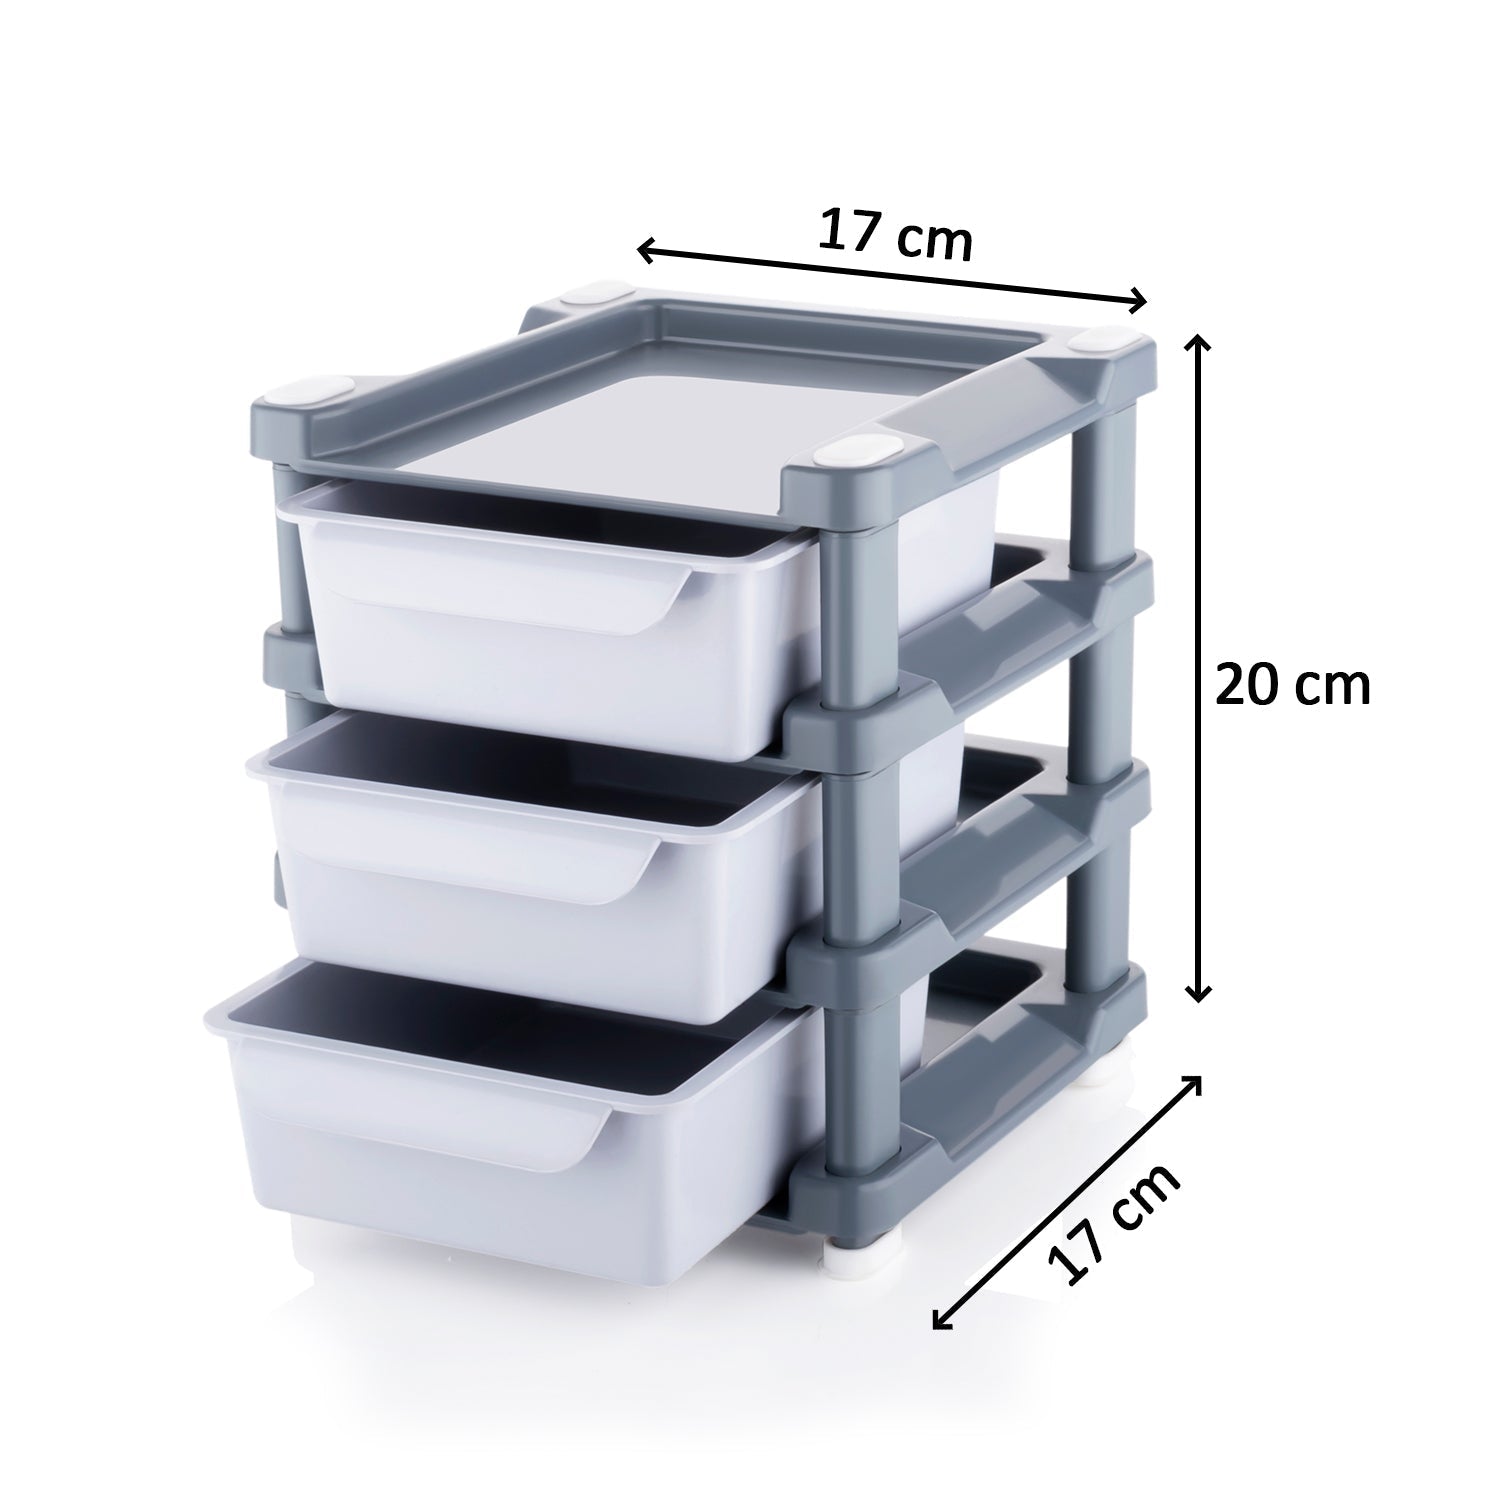 4767 Mini 3 Layer Drawer Used for storing makeup equipment’s and kits used by women’s and ladies.